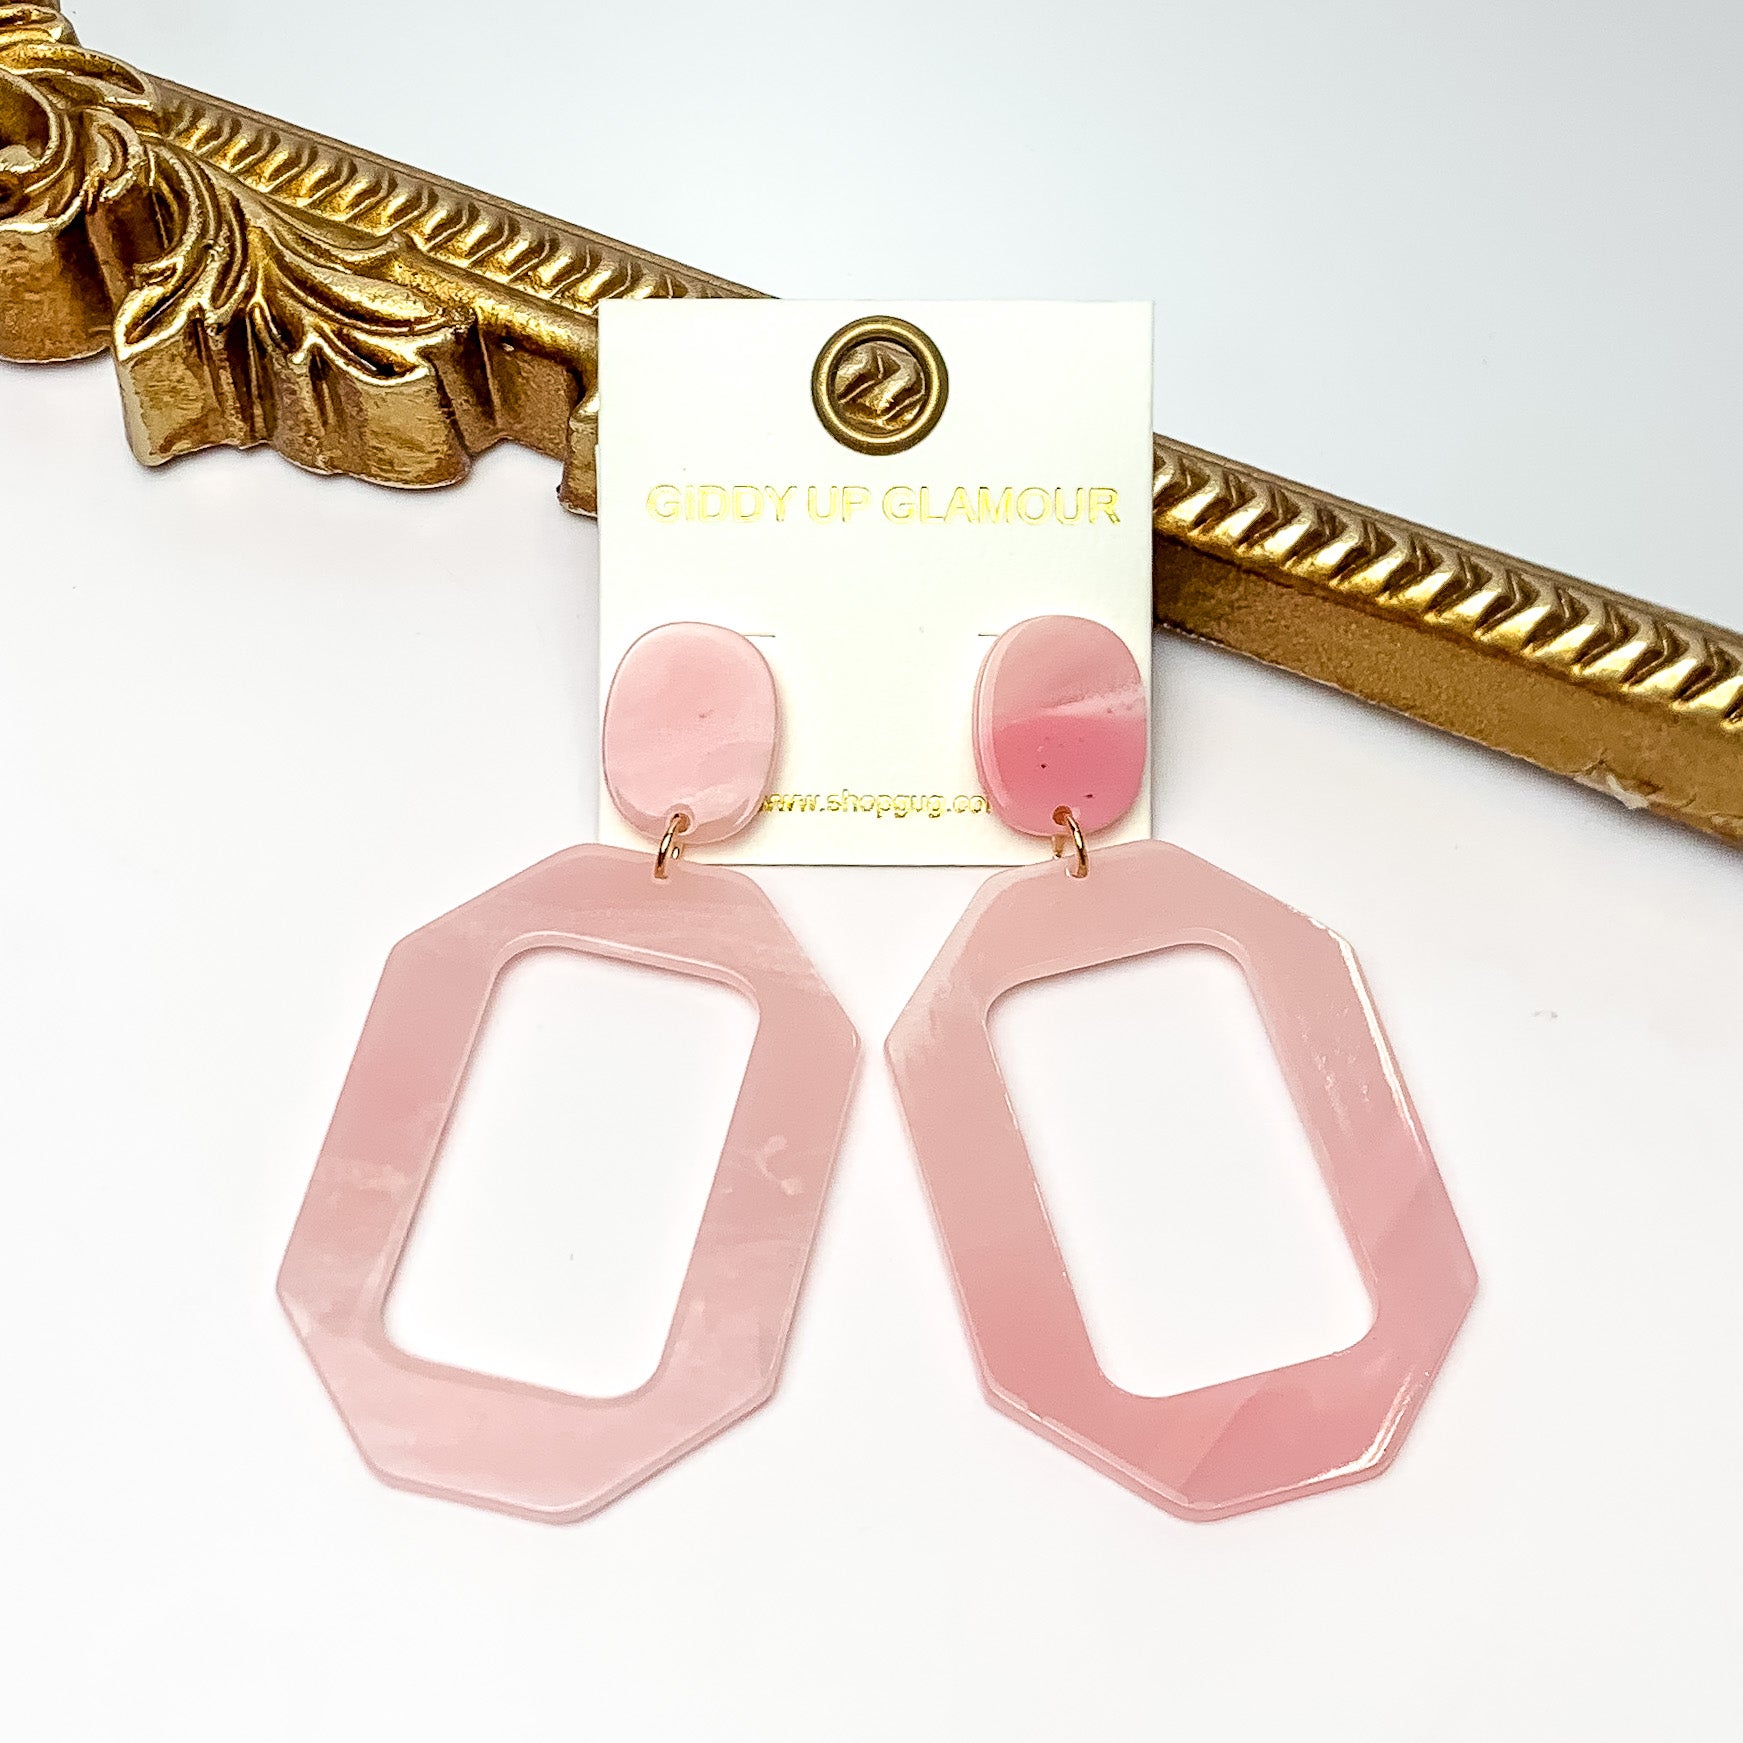 Malibu Marble Open Rectangle Earrings in Light Pink. Pictured on a white background with the earrings laying on a gold frame.